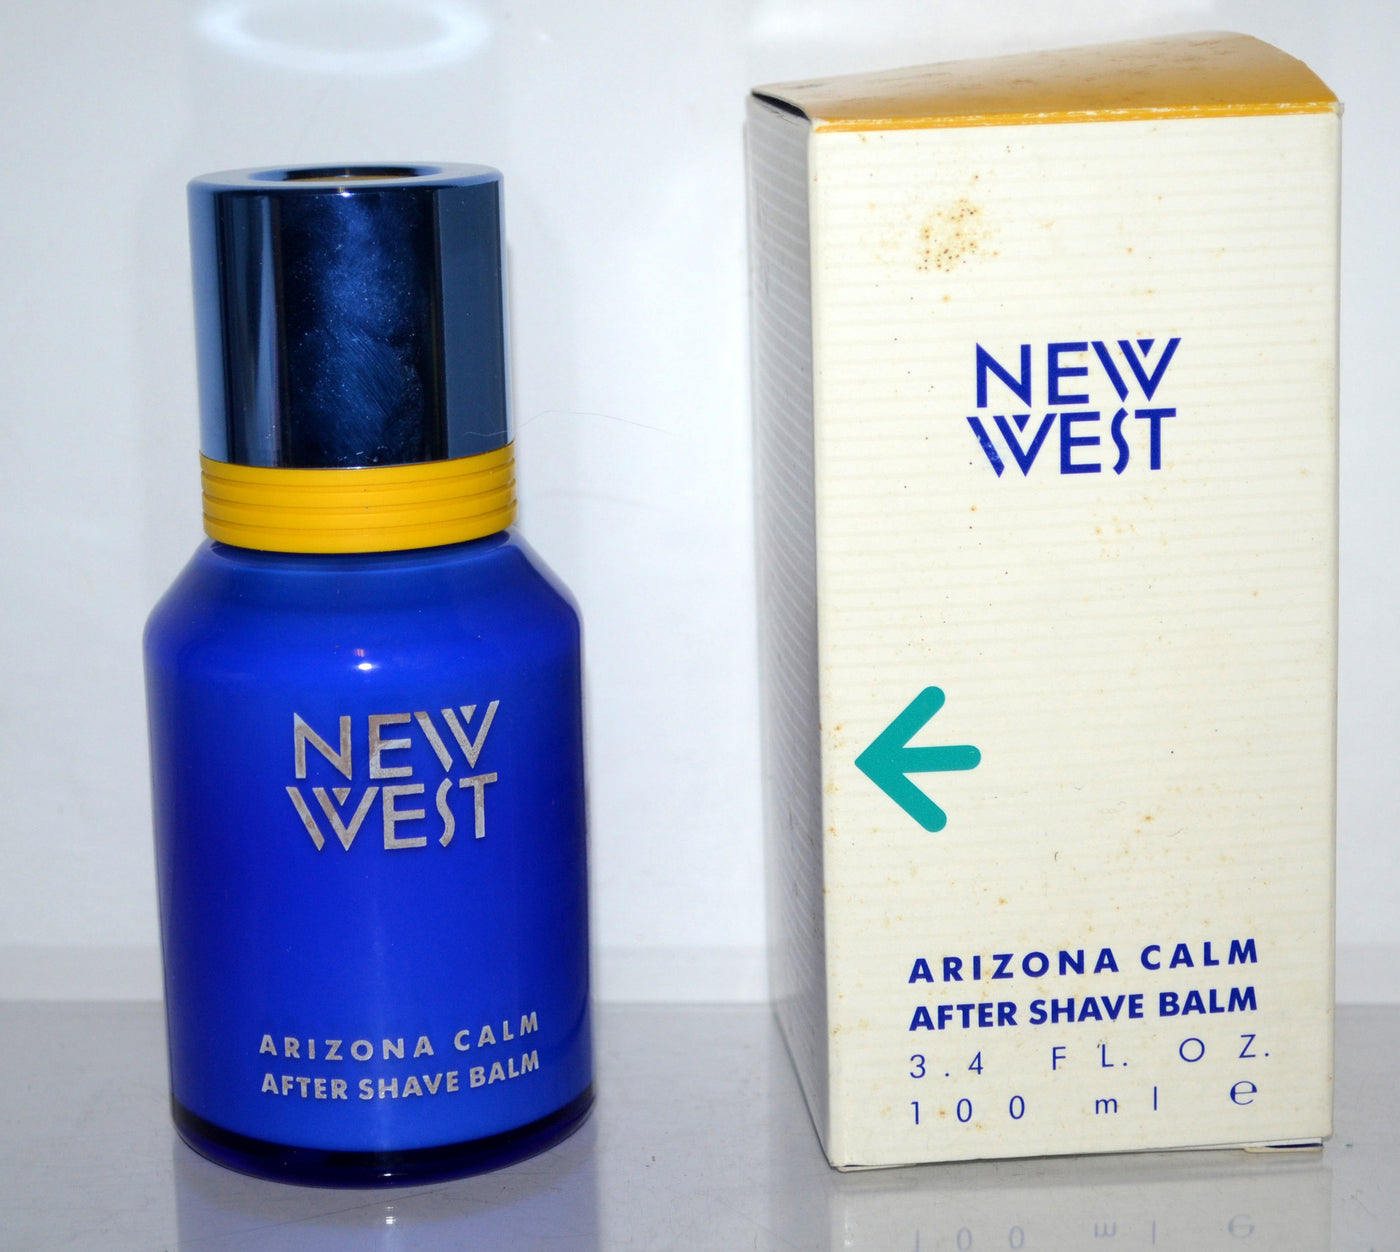 Aramis New West Arizona Calm After Shave